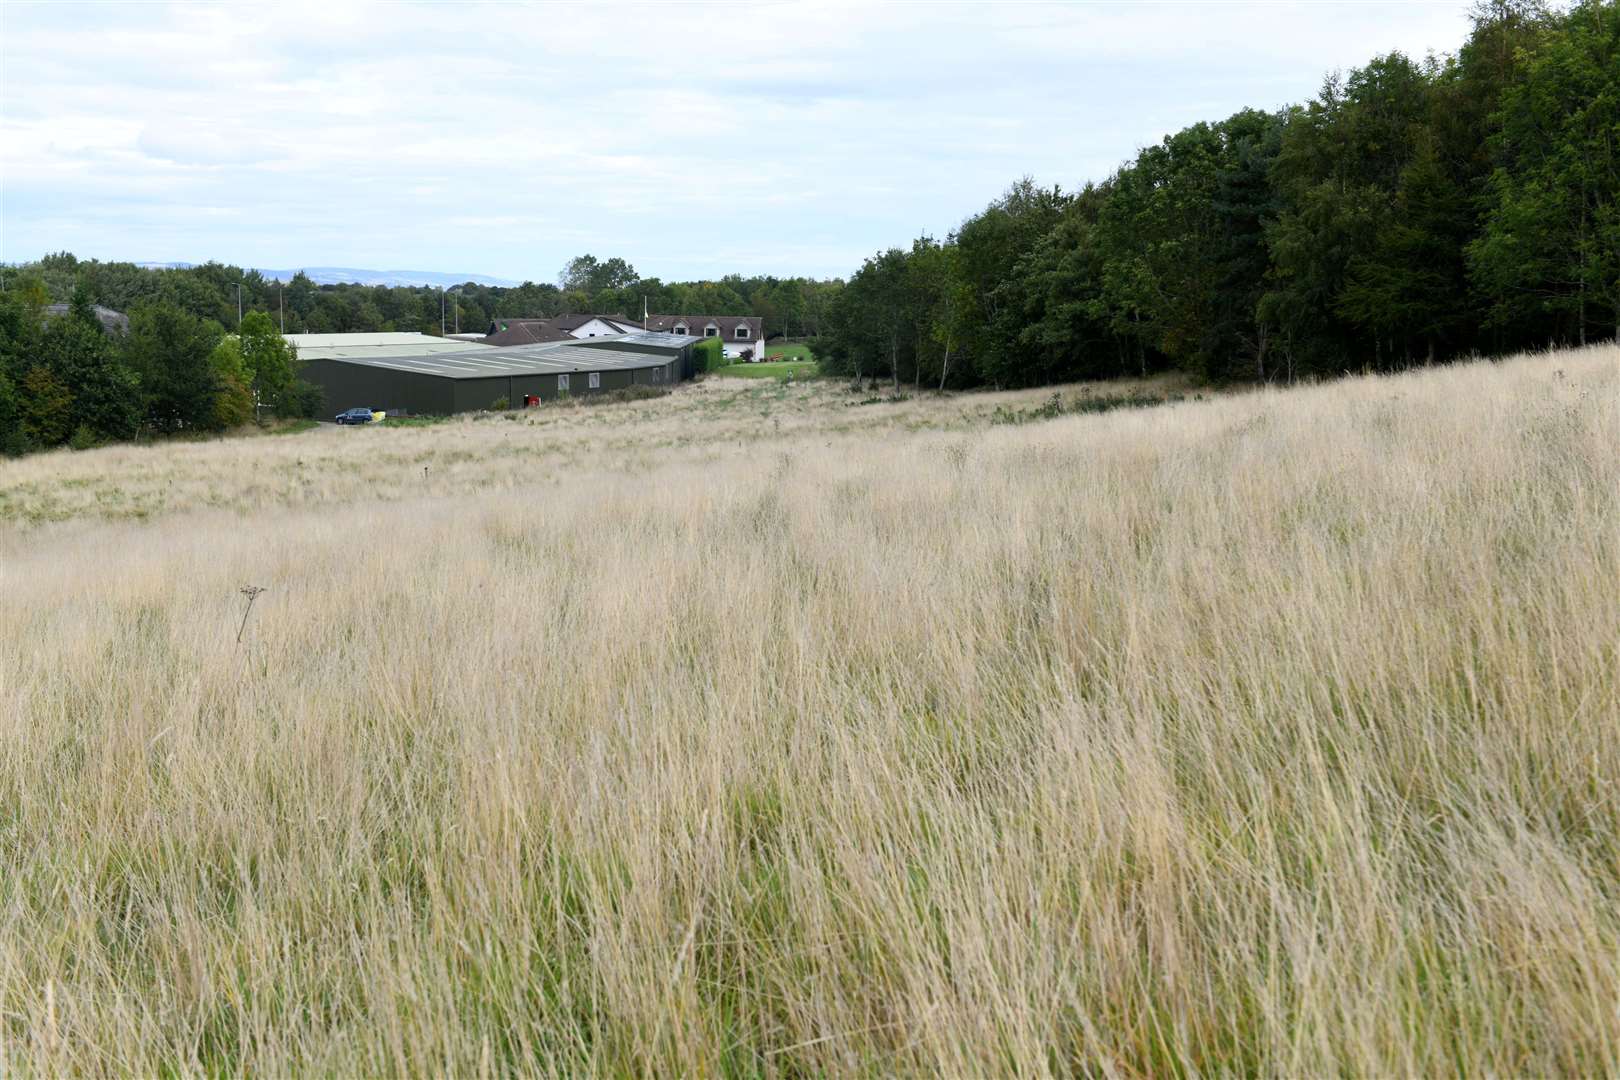 Land behind Inverness karting centre is being eyed up.